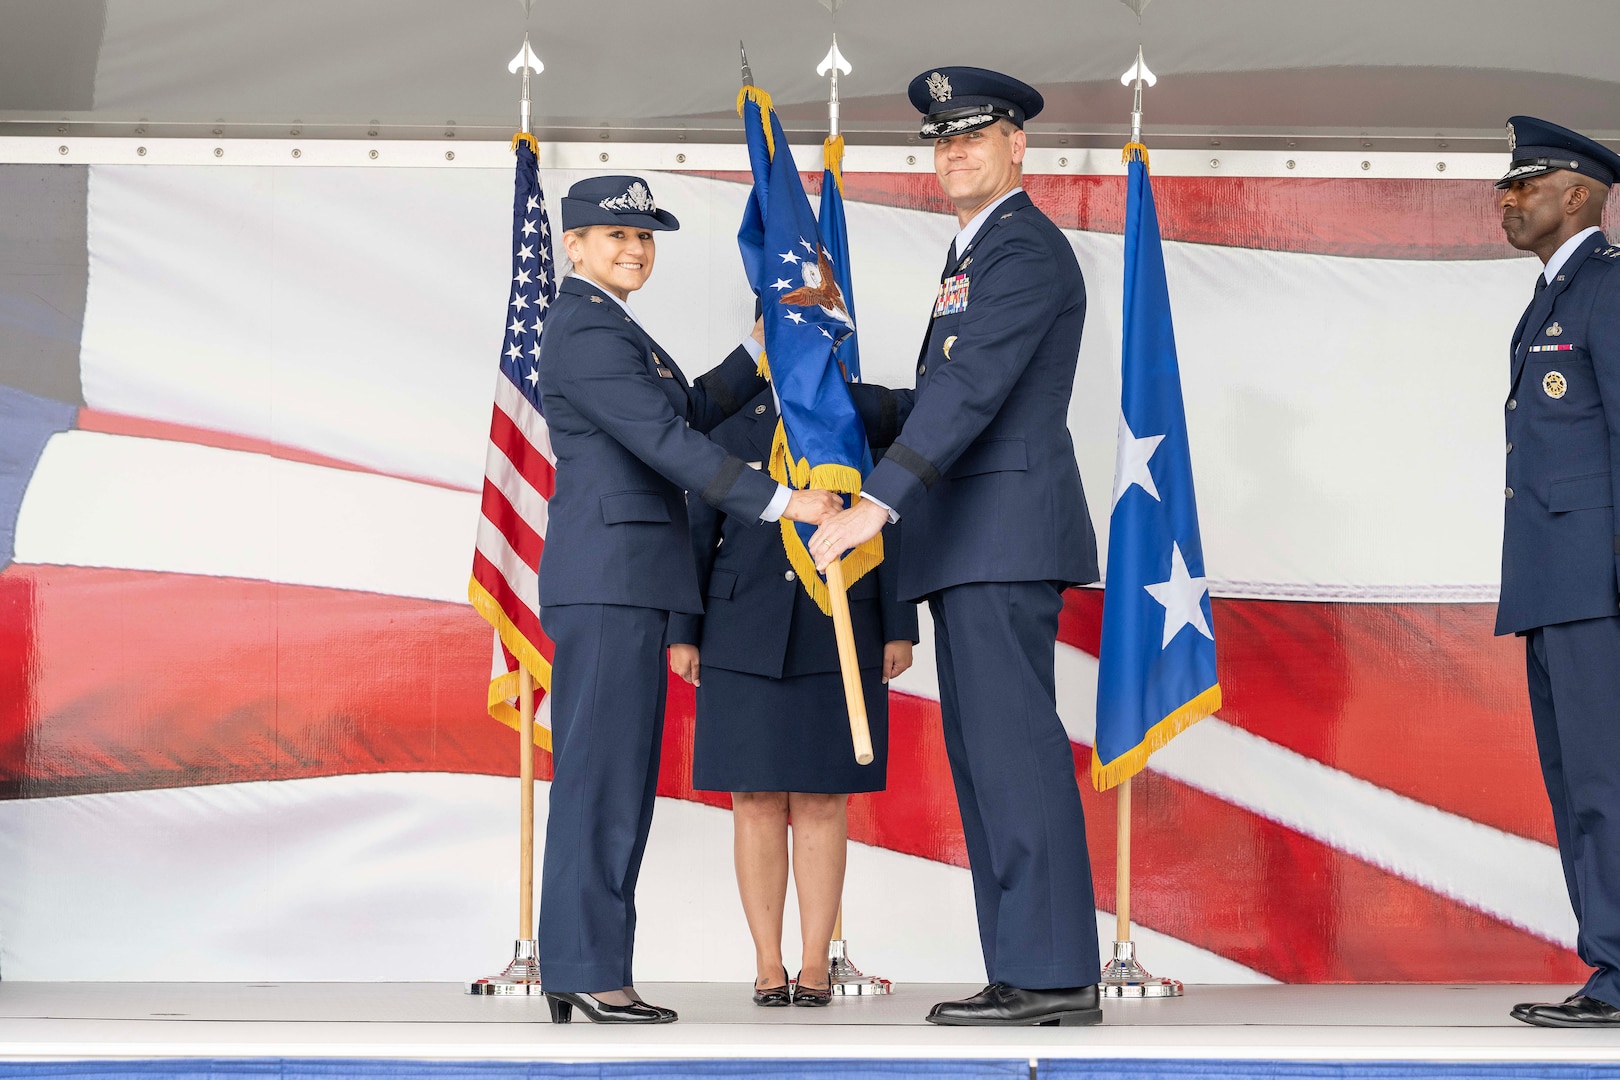 U.S. Air Force Brig. Gen. Jefferson J. O’Donnell, right, receives the Air Force Personnel Center’s flag from Lt. Gen. Caroline M. Miller, Deputy Chief of Staff for Manpower, Personnel and Services, Headquarters U.S. Air Force, during the AFPC change of command ceremony June 20 at Joint Base San Antonio-Randolph, Texas. Prior to taking command of AFPC, O’Donnell served as the Director of Regional Affairs for the Deputy Under Secretary of the Air Force, International Affairs.